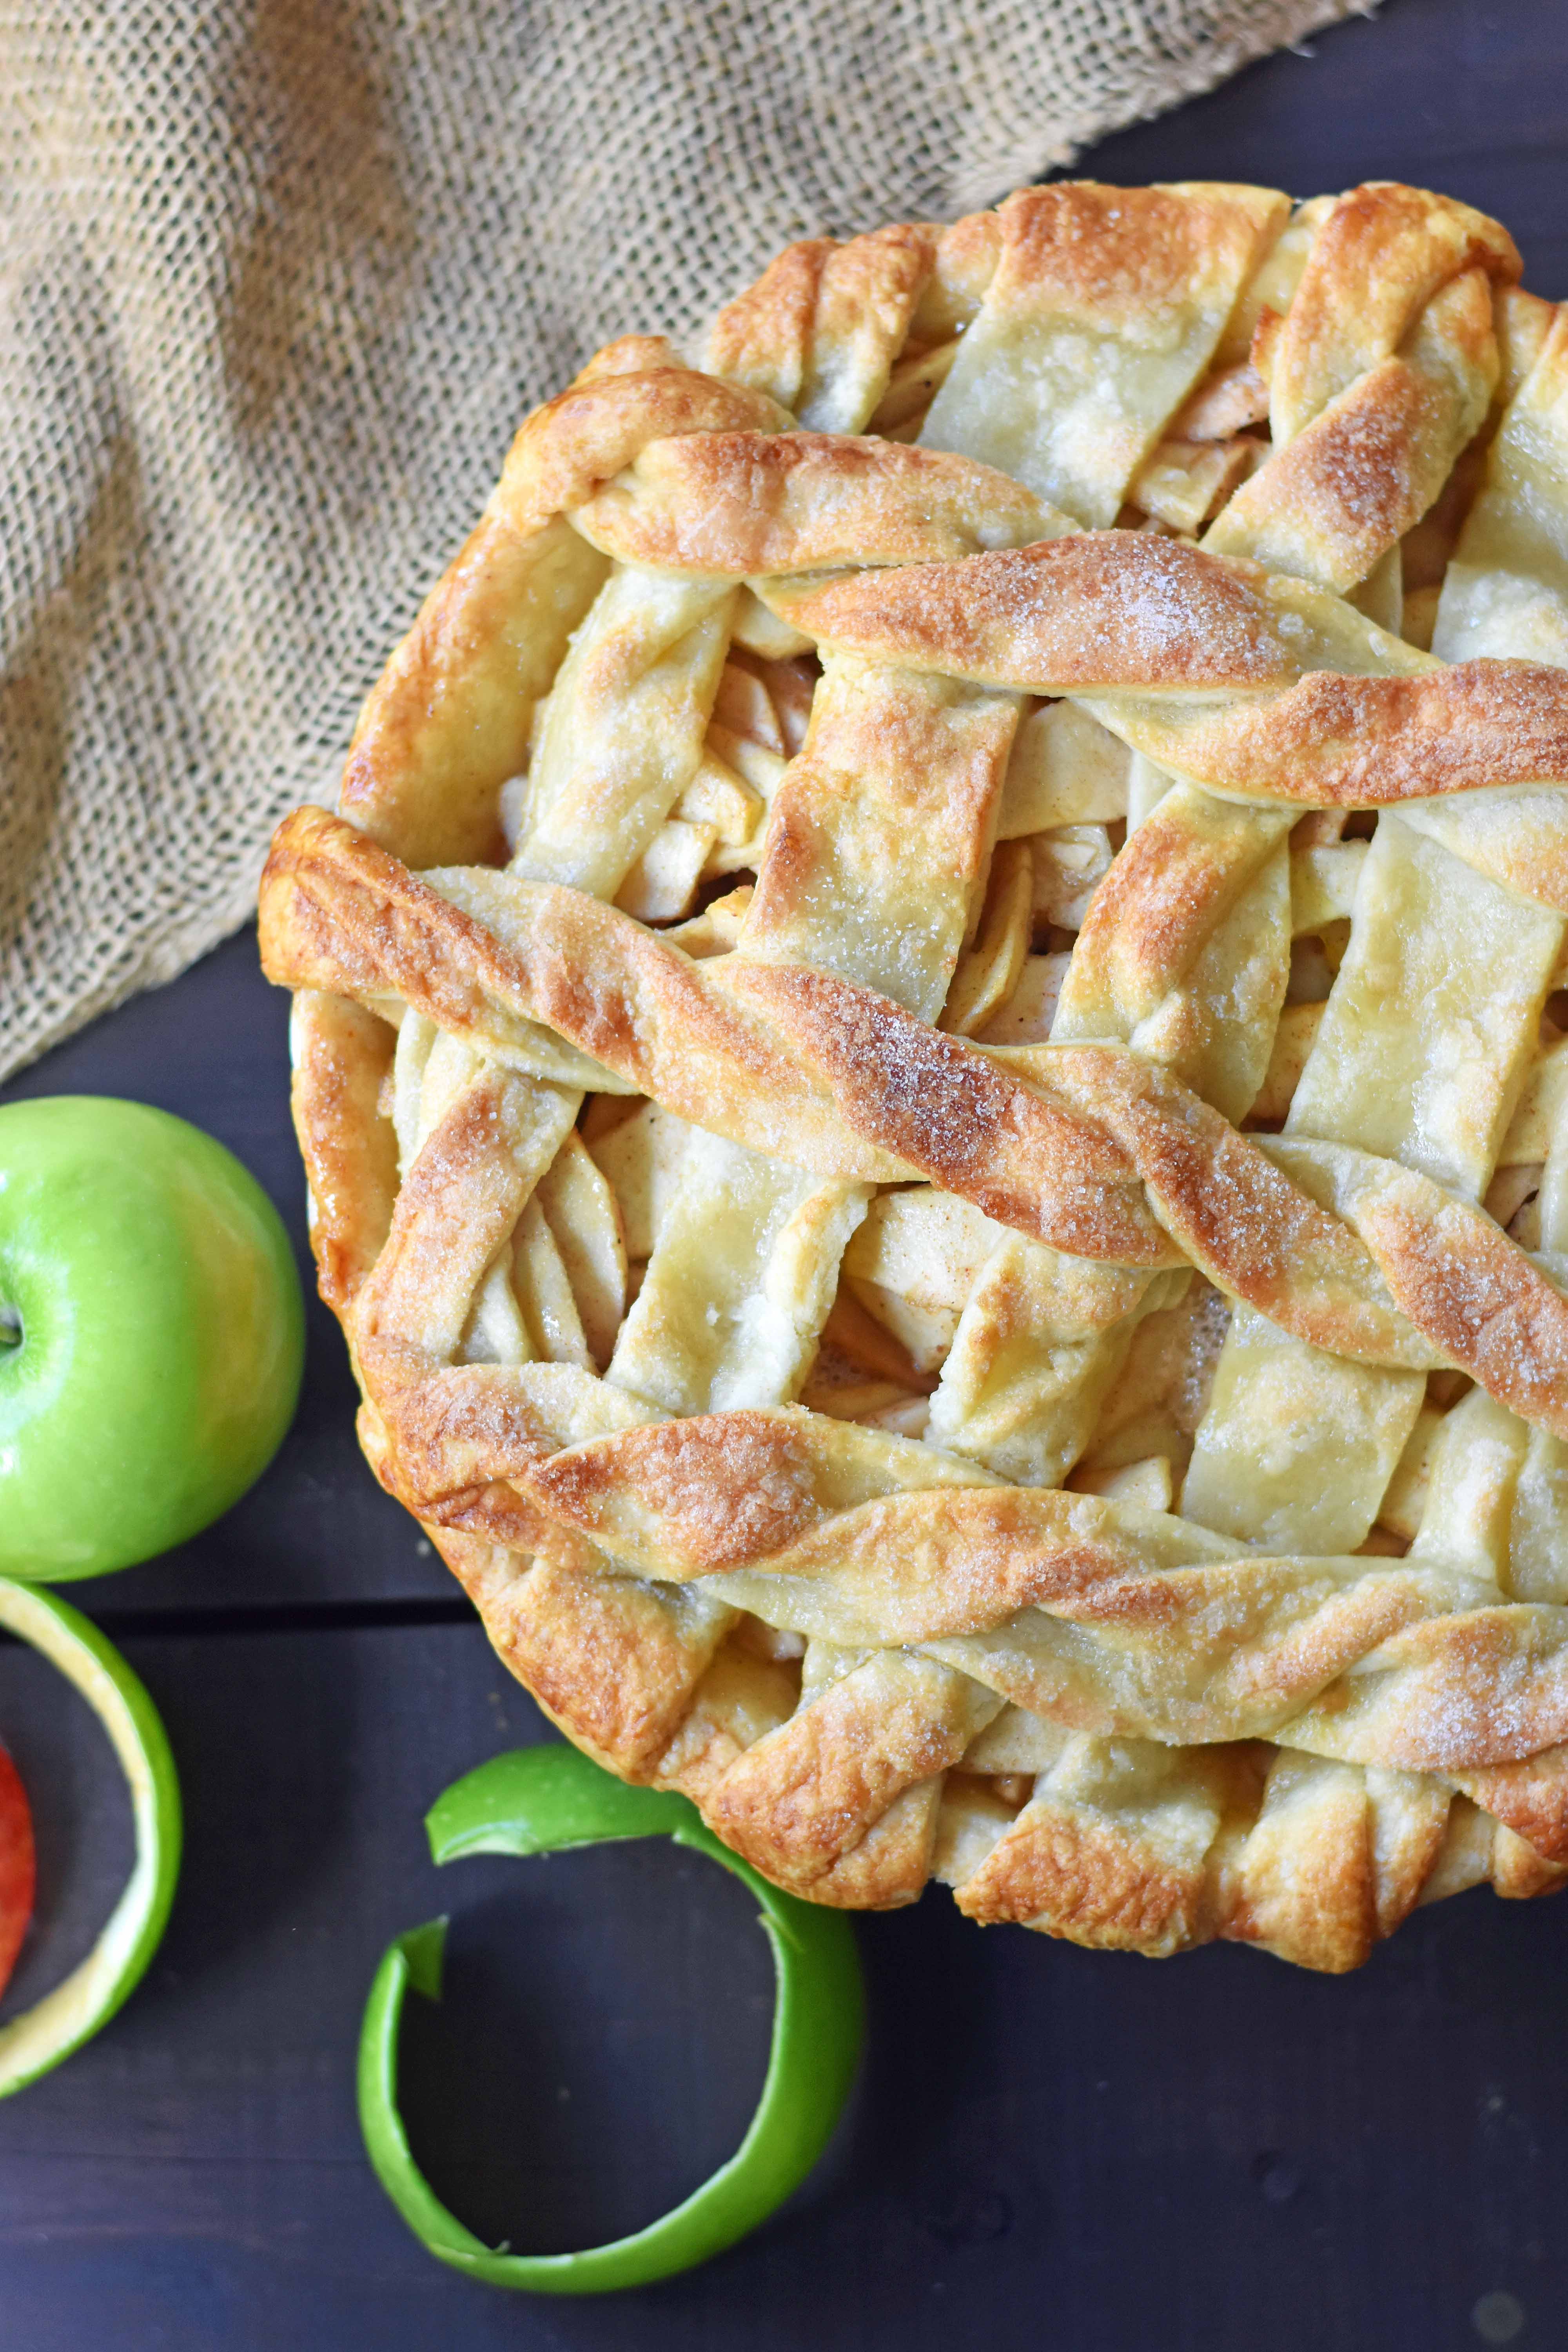 Caramel Apple Pie is a made with sweet and crisp apples sauteed in brown sugar and drizzled with homemade caramel sauce, all in a buttery flaky pie crust. The BEST Apple Pie Recipe drizzled with salted caramel sauce. www.modernhoney.com